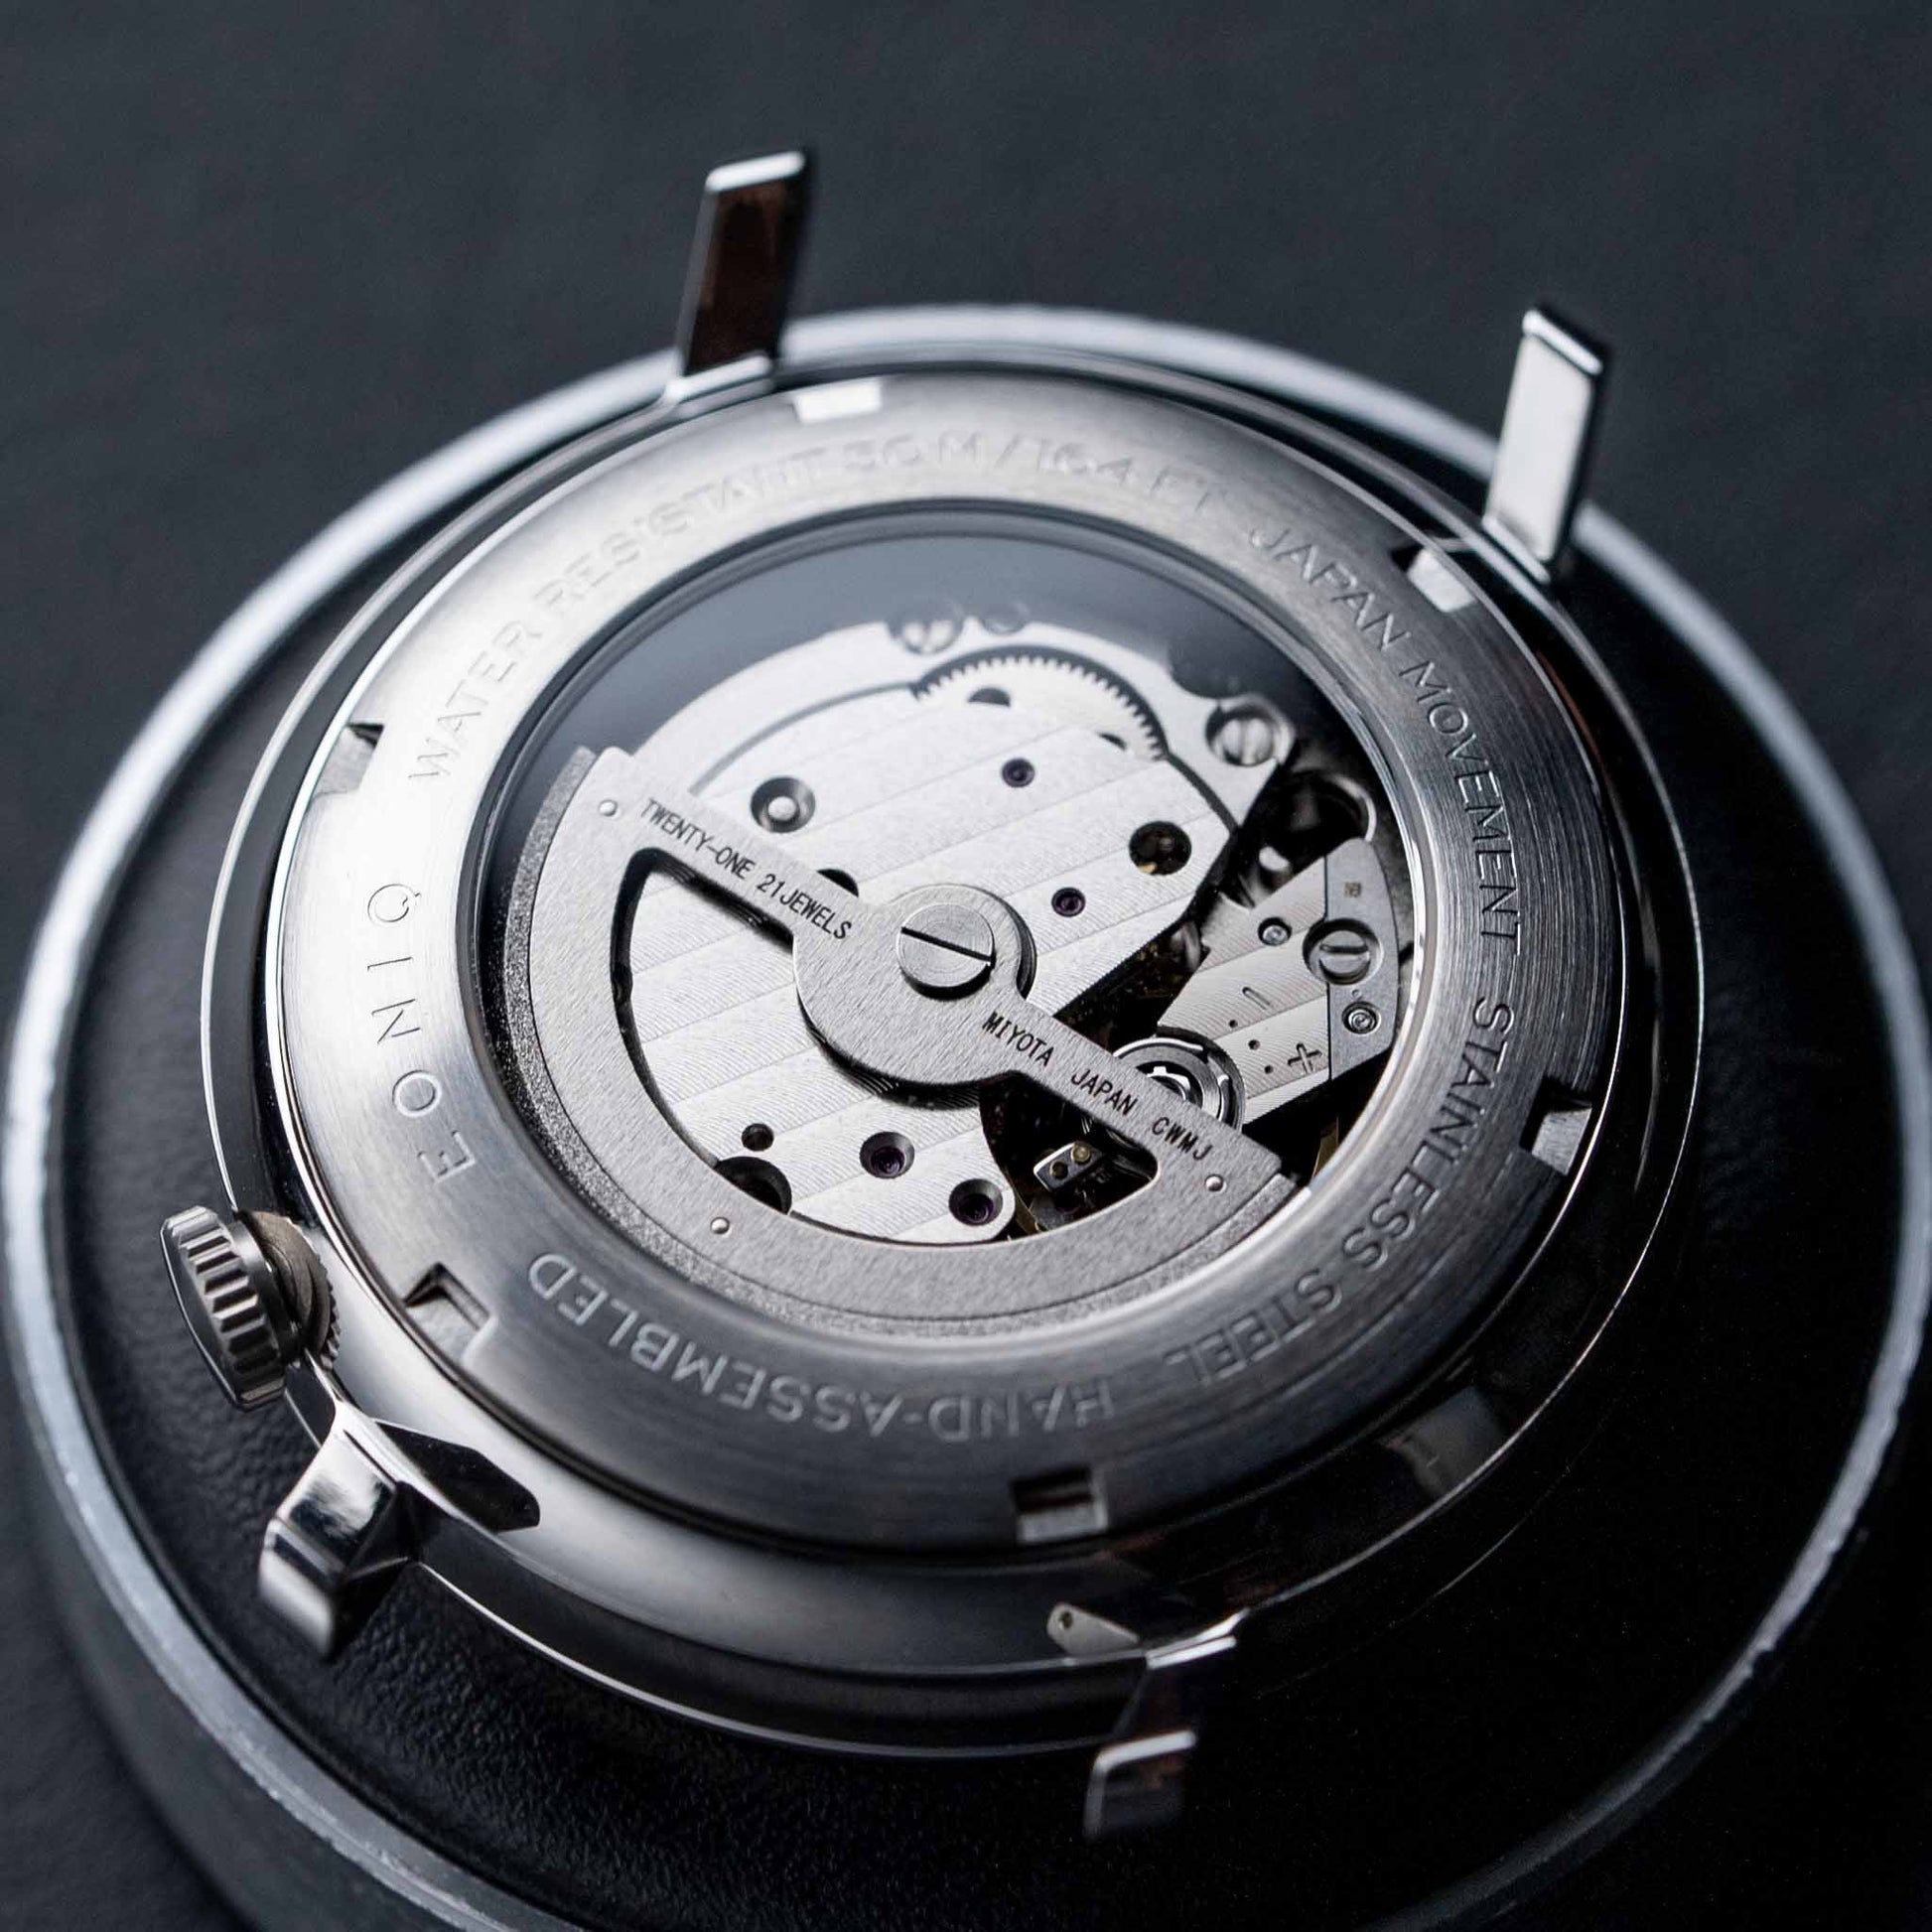 EONIQ custom watch - ALSTER series with sapphire dial - case back miyota 8 series movement